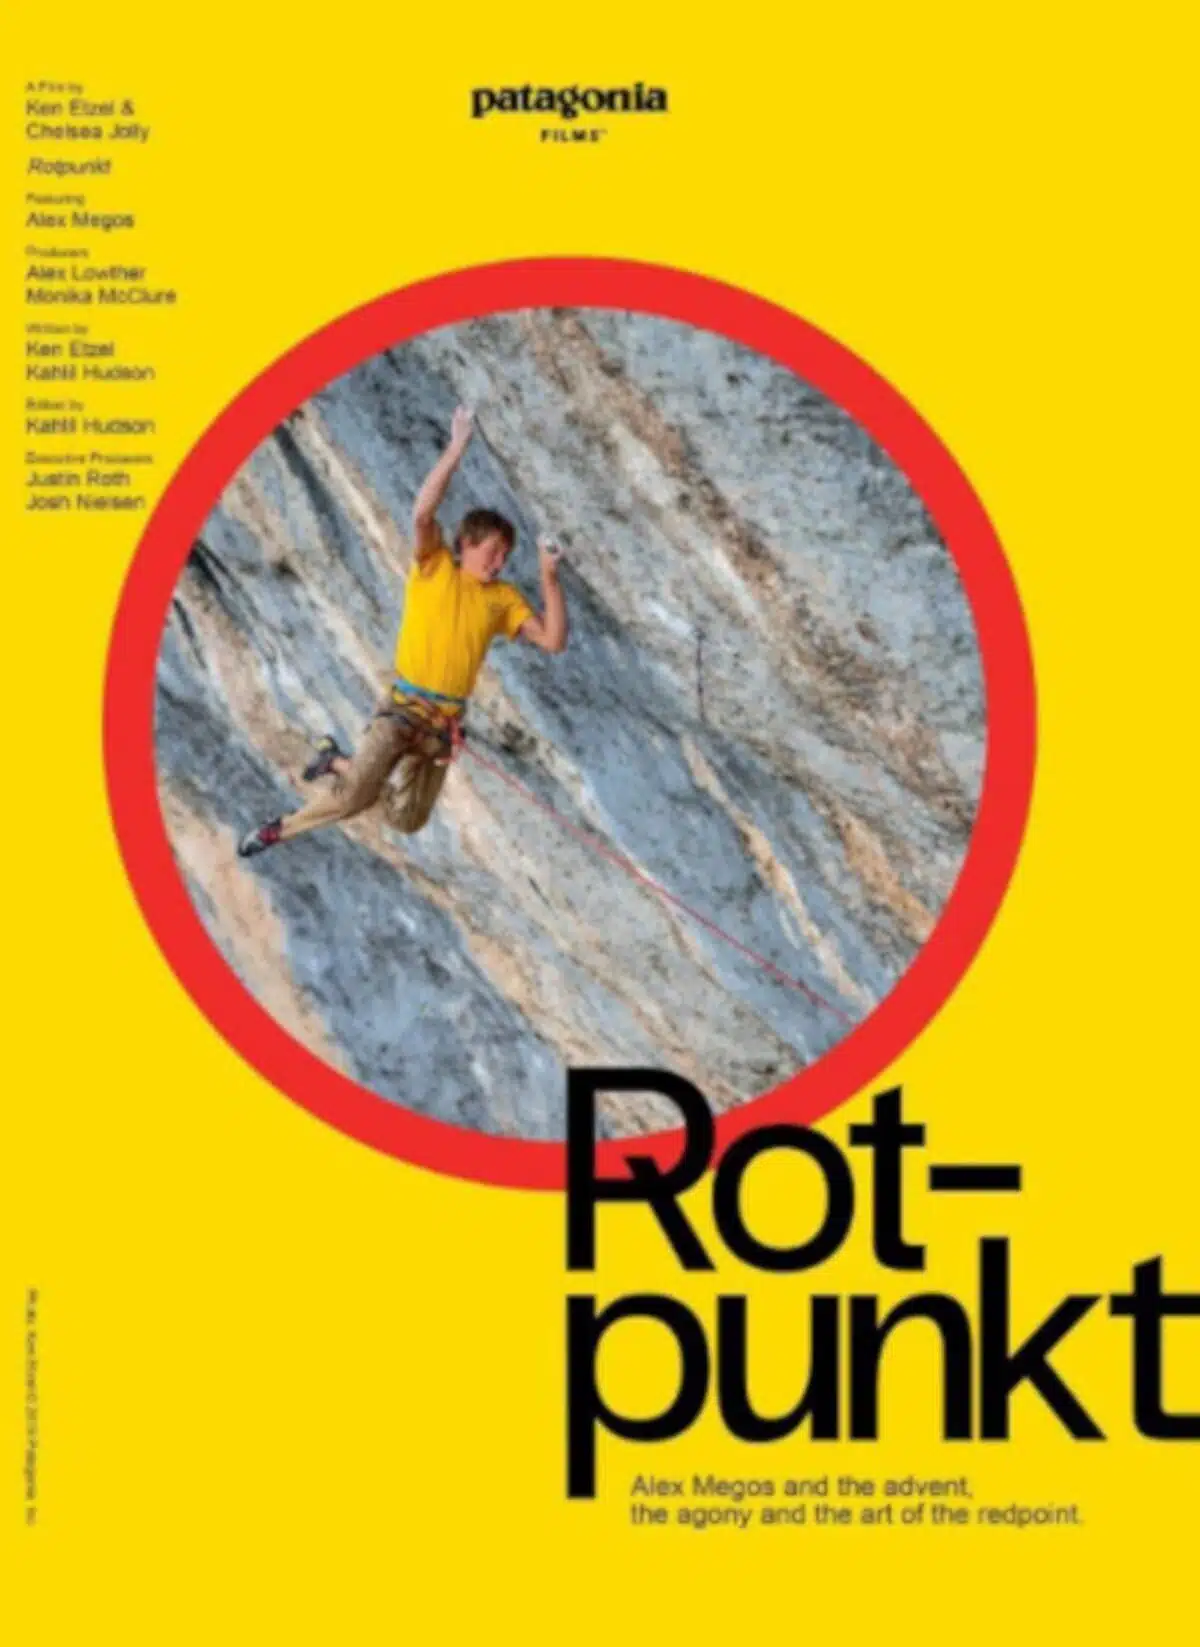 Rotpunkt is a free climbing movie you can watch on YouTube…for free!